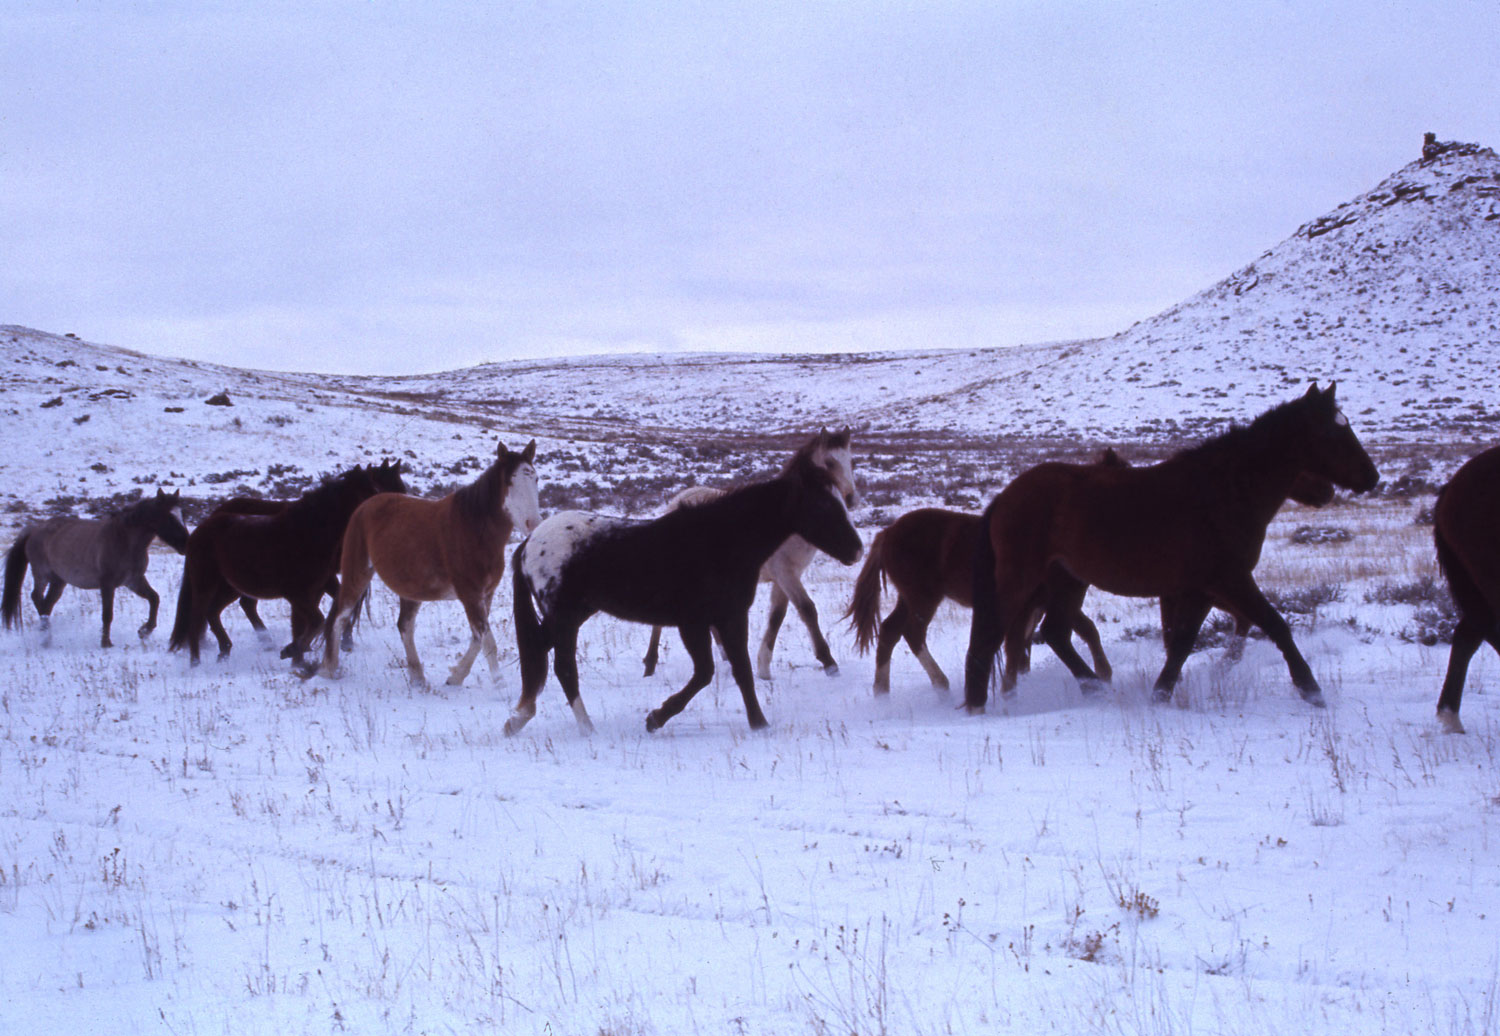 Mustangs in the snow, 1968.